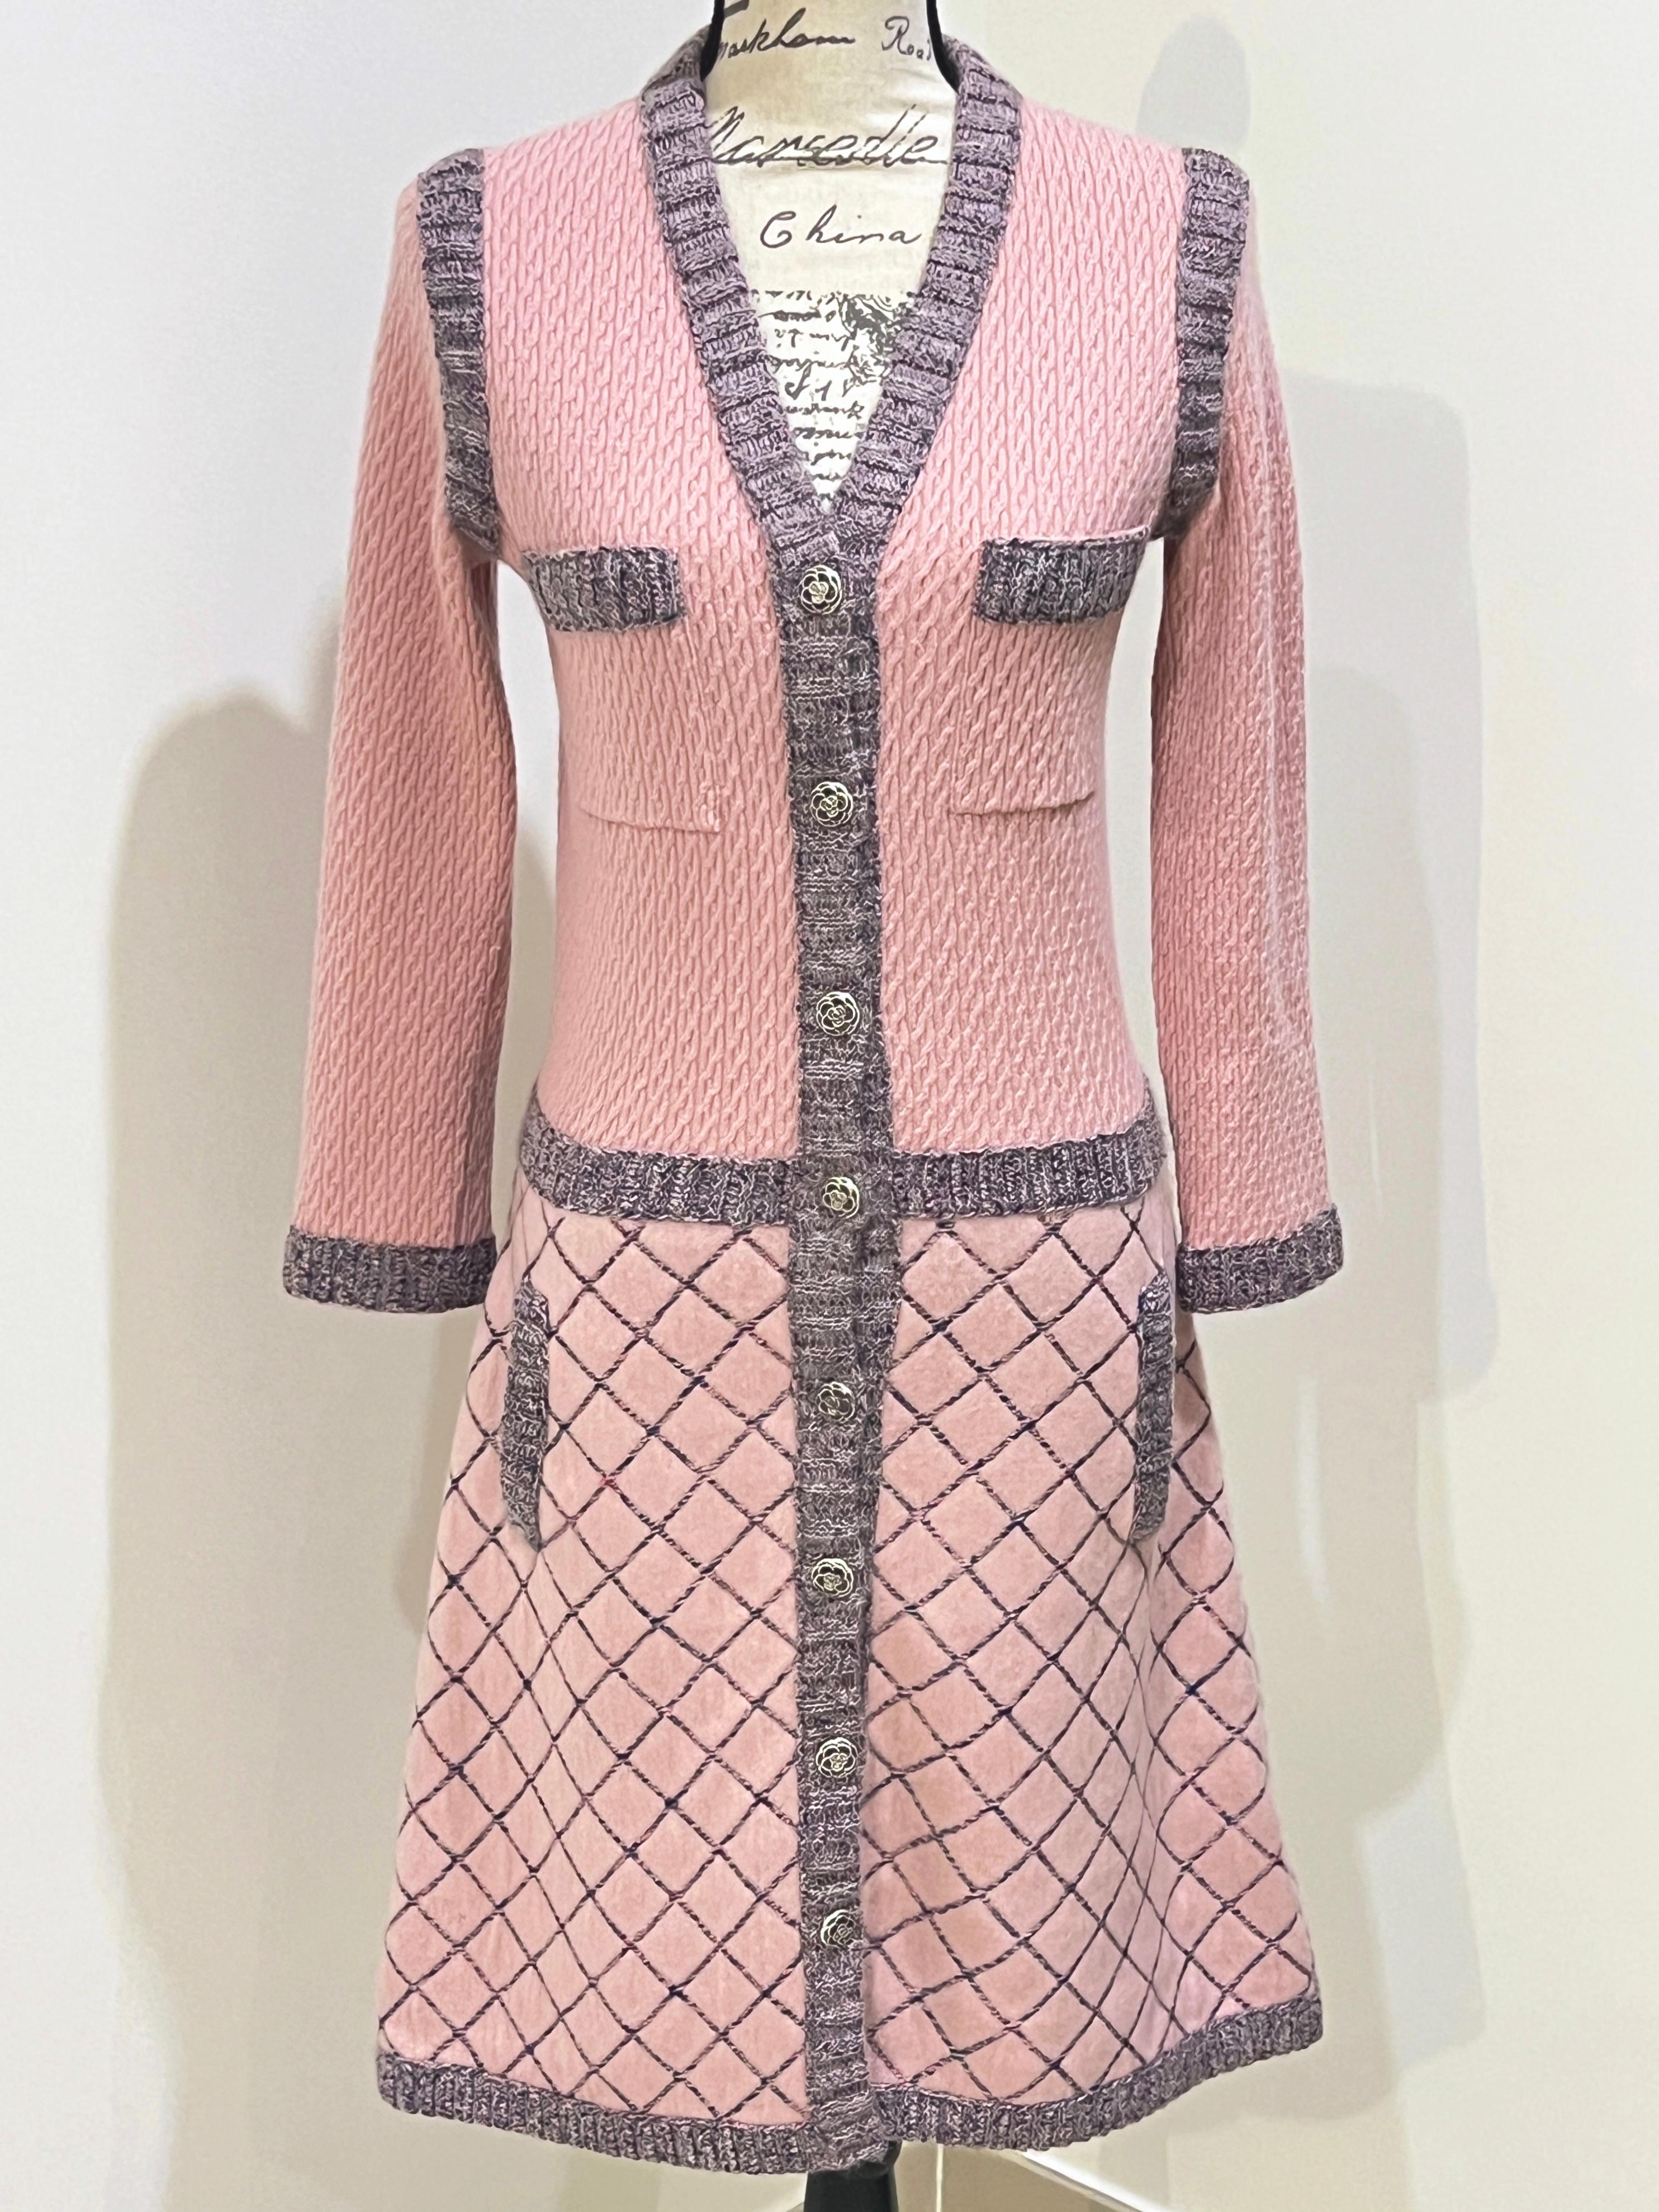 Chanel Iconic Coco Brasserie Quilted Jacket Dress For Sale 4